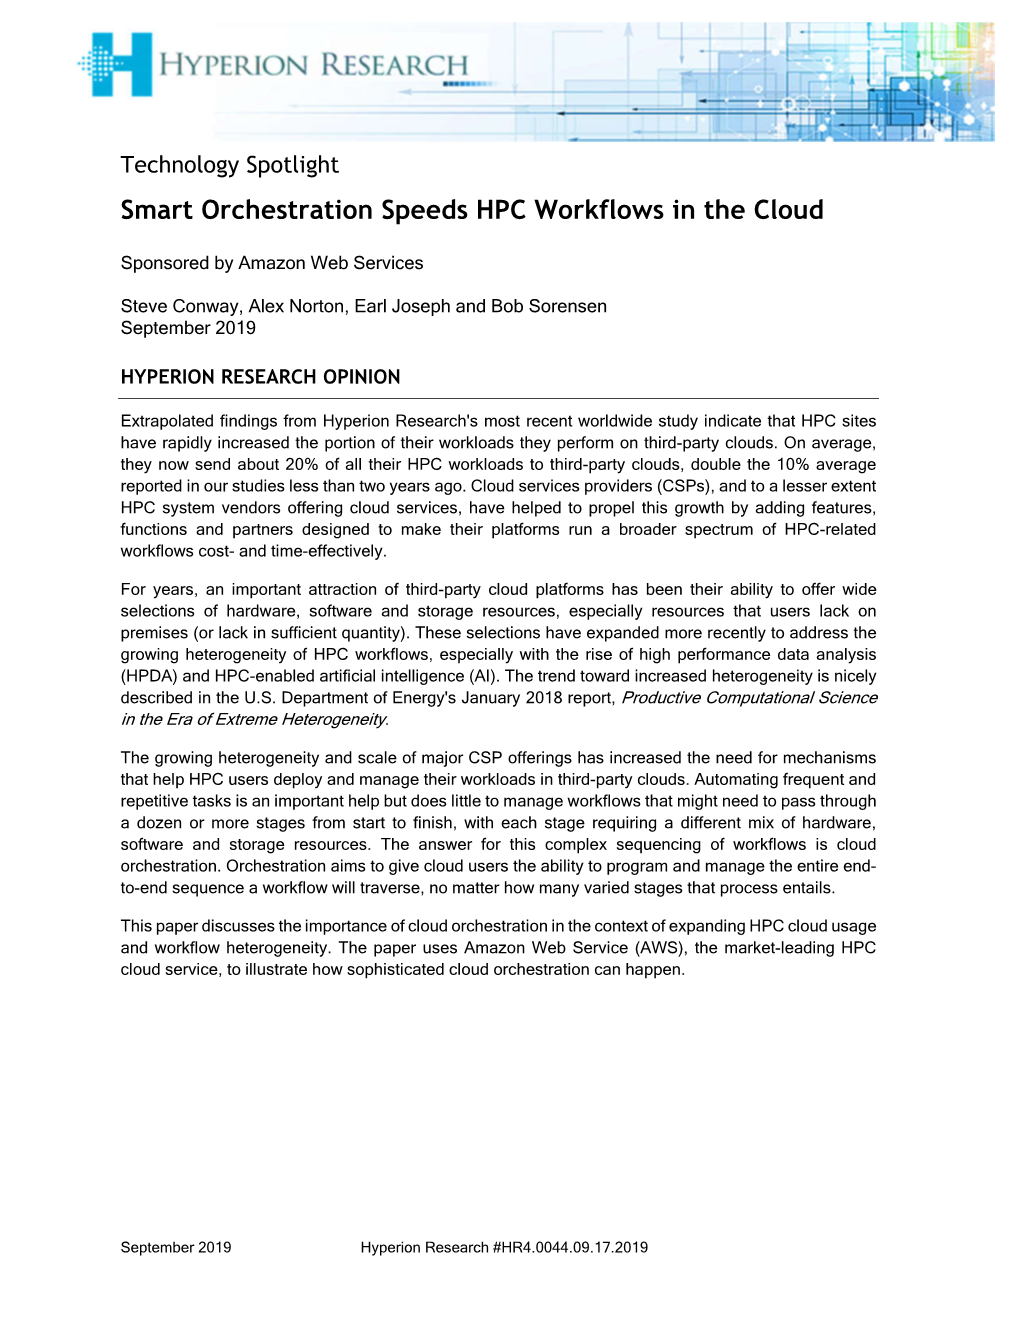 Smart Orchestration Speeds HPC Workflows in the Cloud